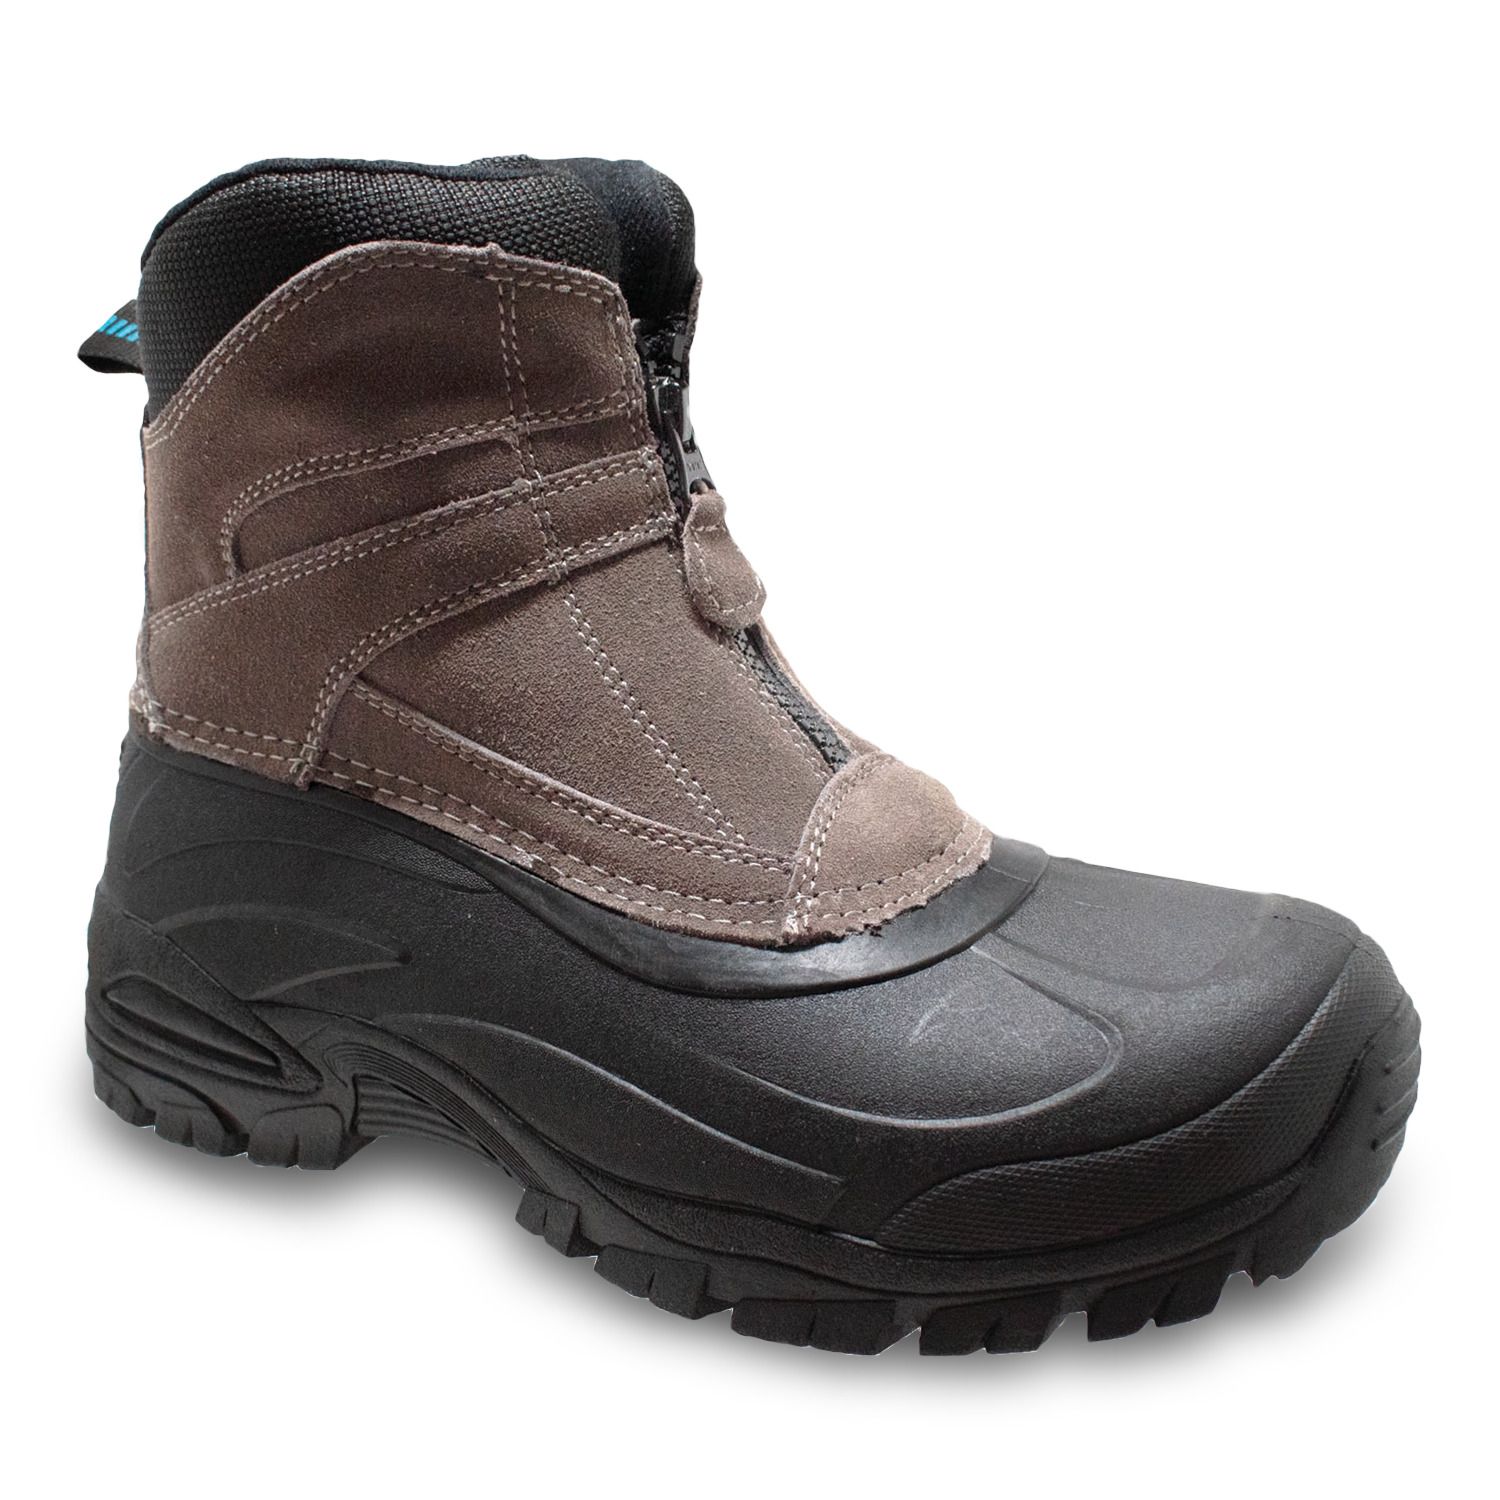 men's winter boots at kohl's